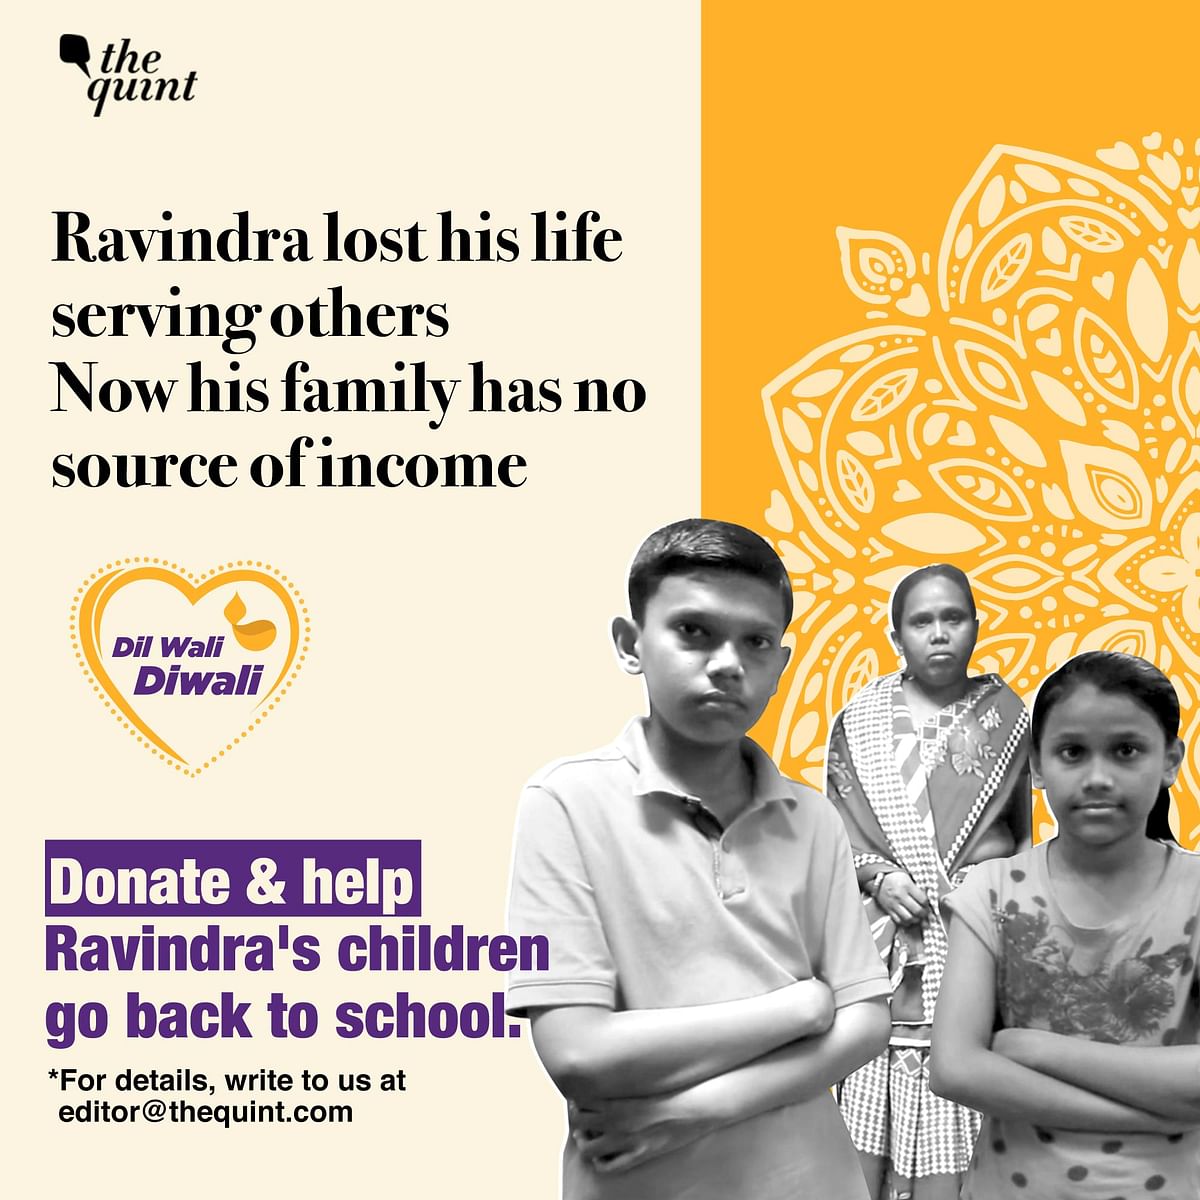 Ravindra was a COVID warrior,  he died serving others. Now his family has no source of income. You can help them.